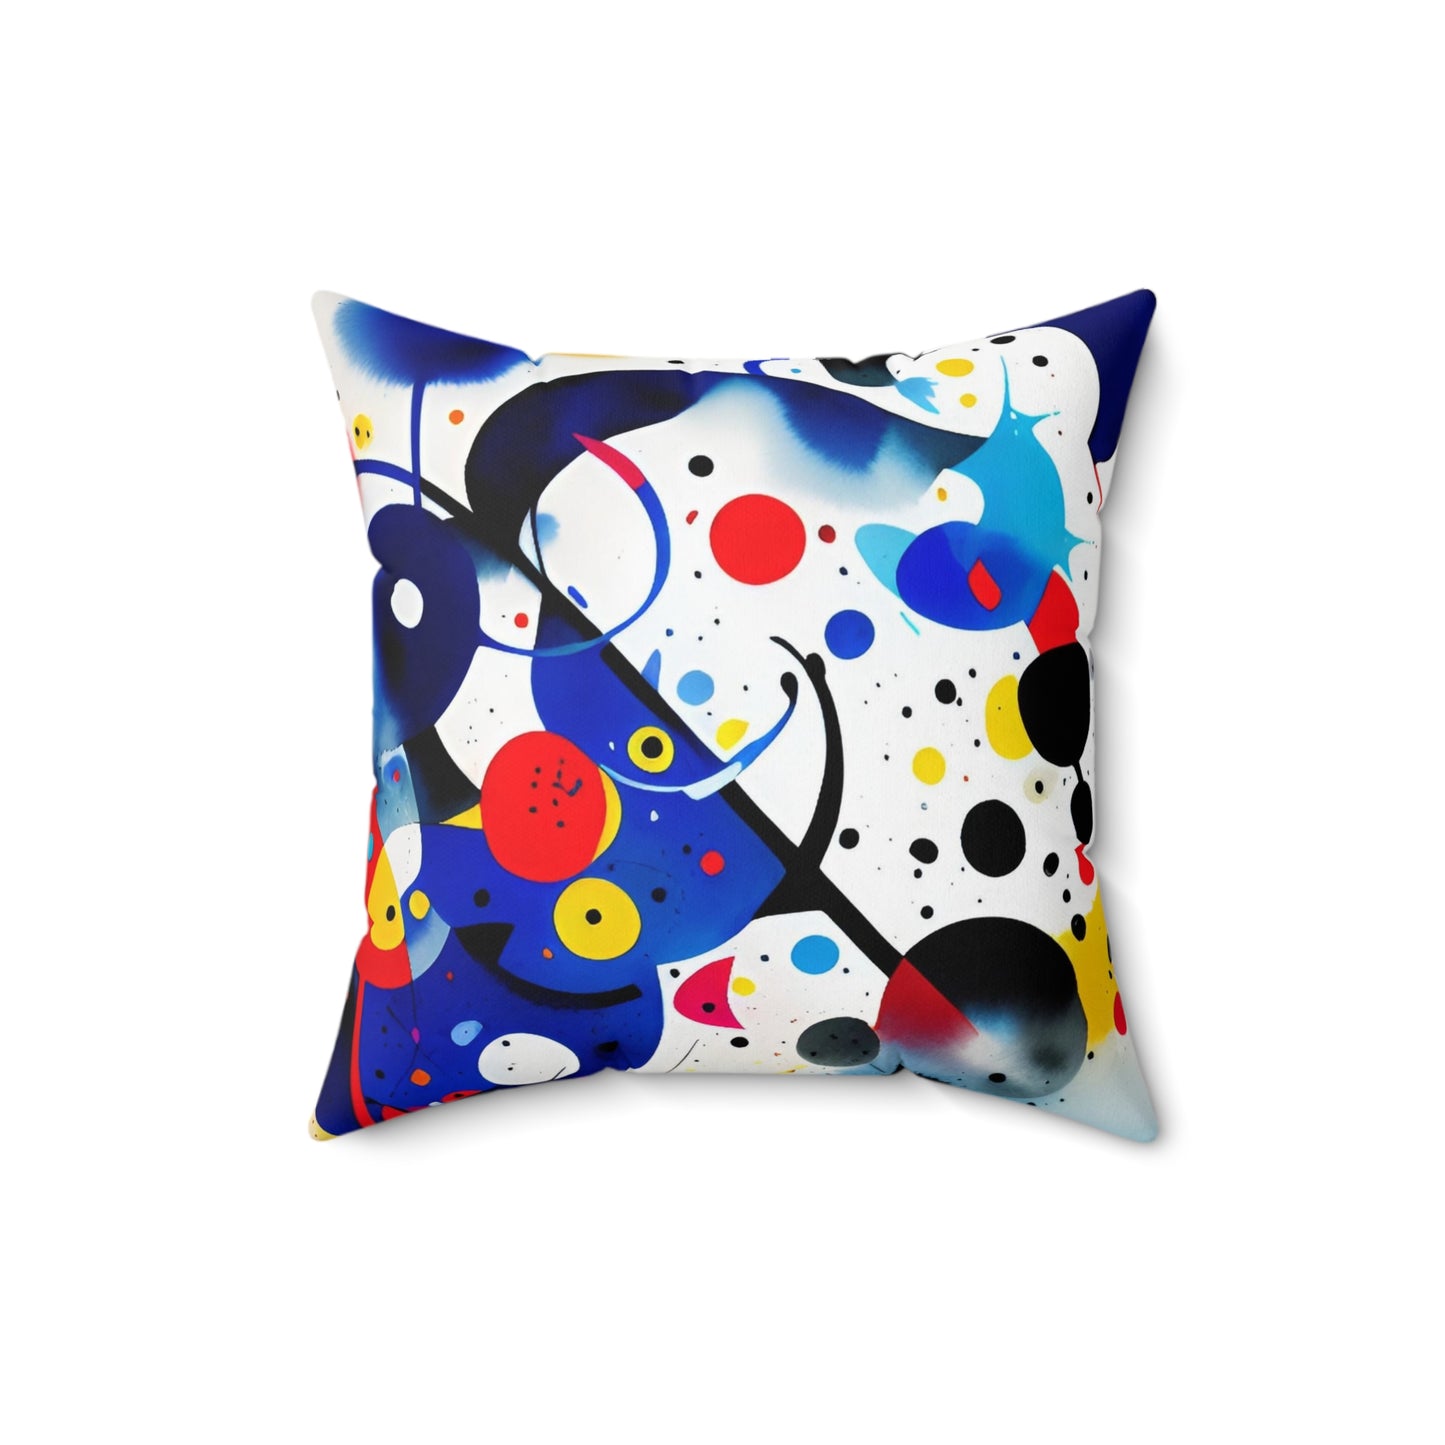 Spun Polyester Square Pillow, Inspired by Miro